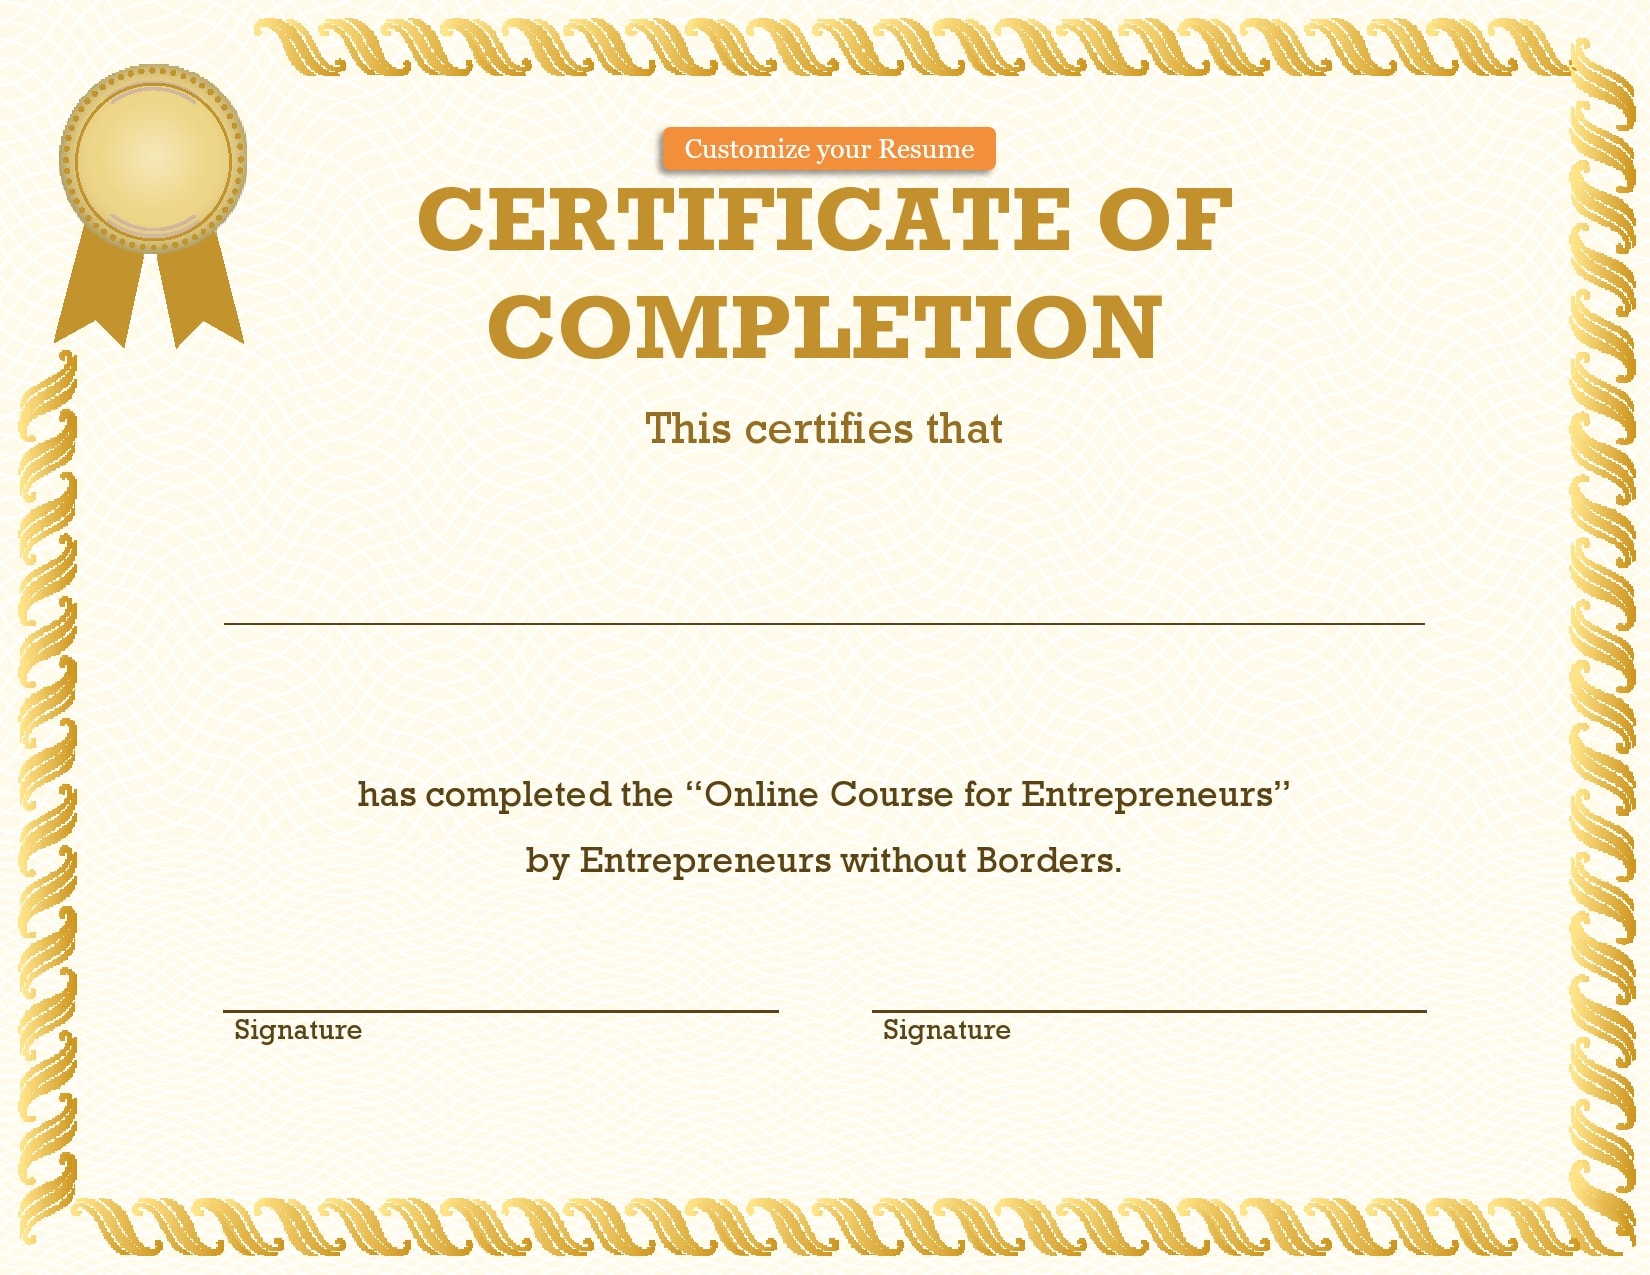 23 Great Certificate of Completion Templates (23% FREE) Intended For Free Certificate Of Completion Template Word